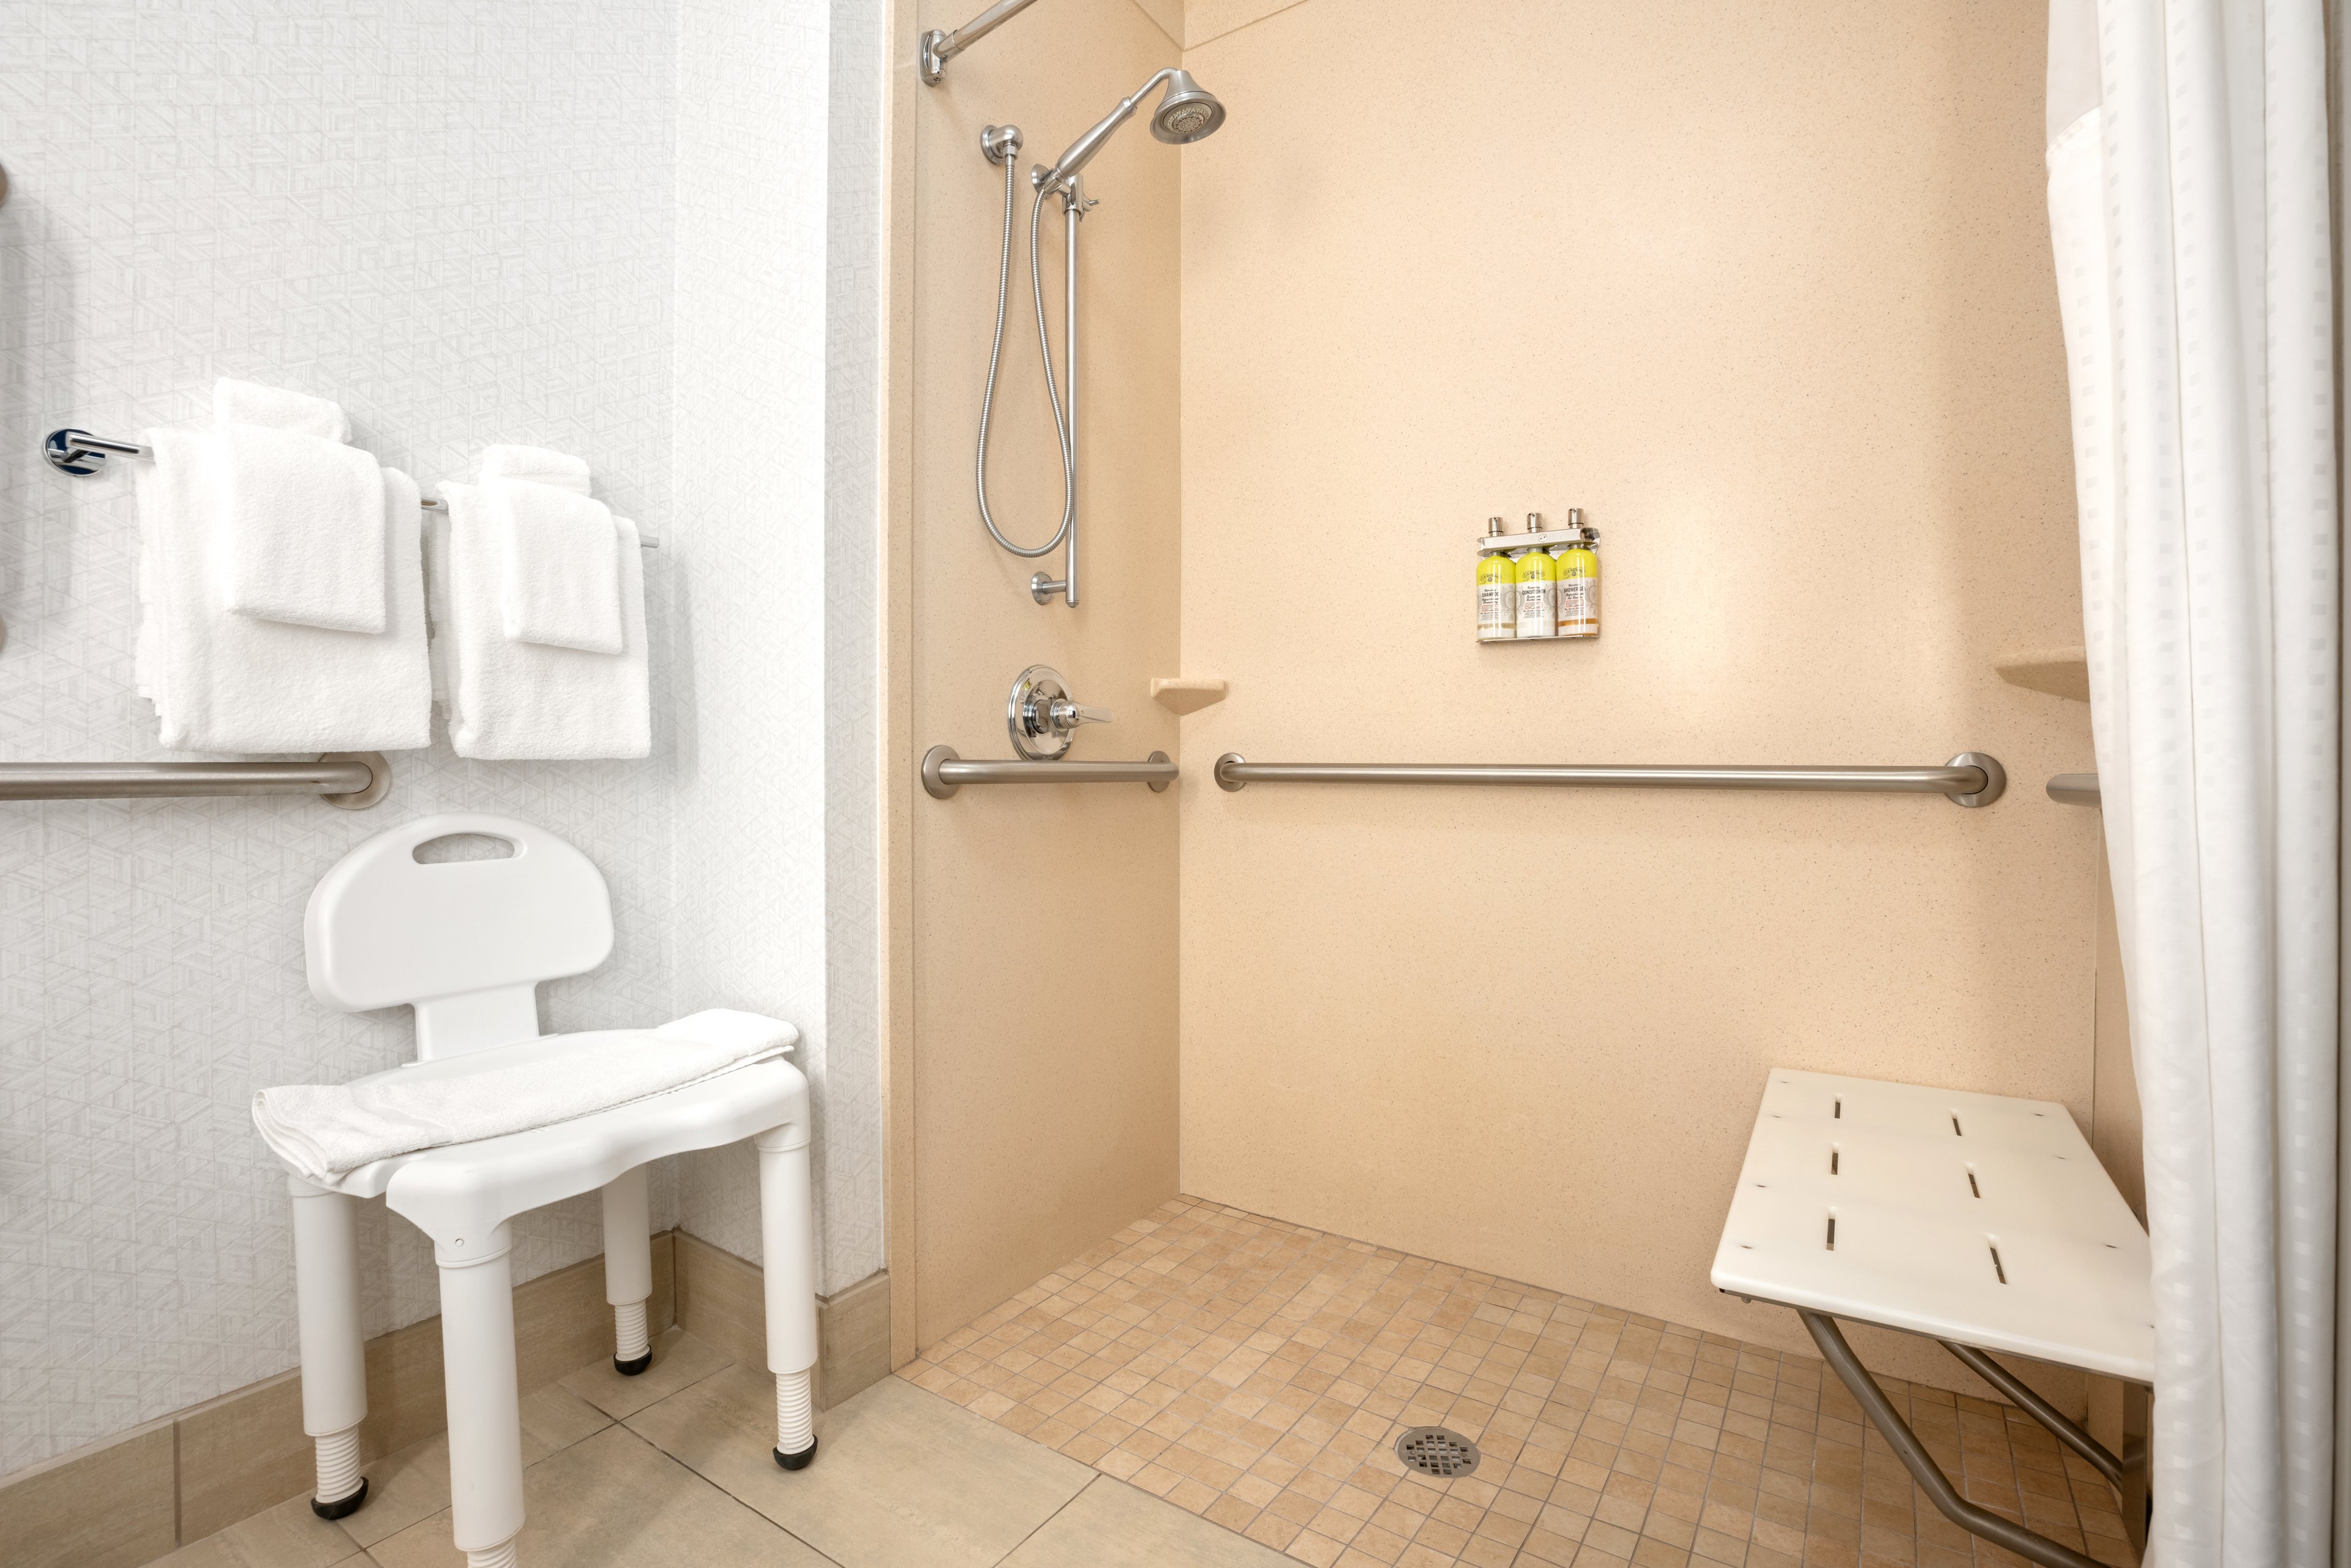 ADA Accessible room with a roll in shower